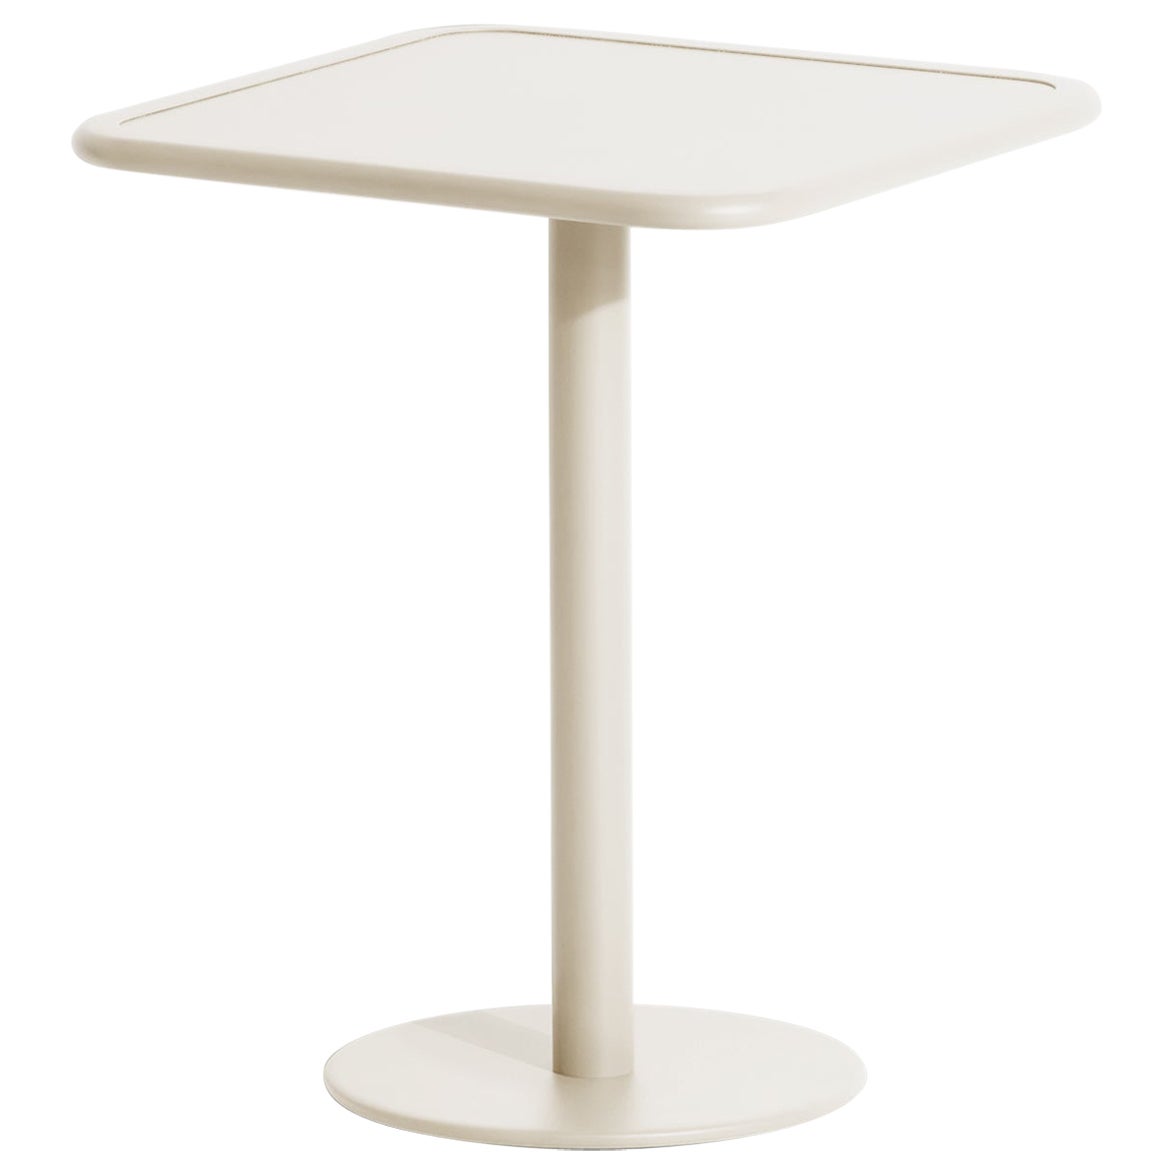 Petite Friture Week-End Bistro Square Dining Table in Ivory Aluminium, 2017